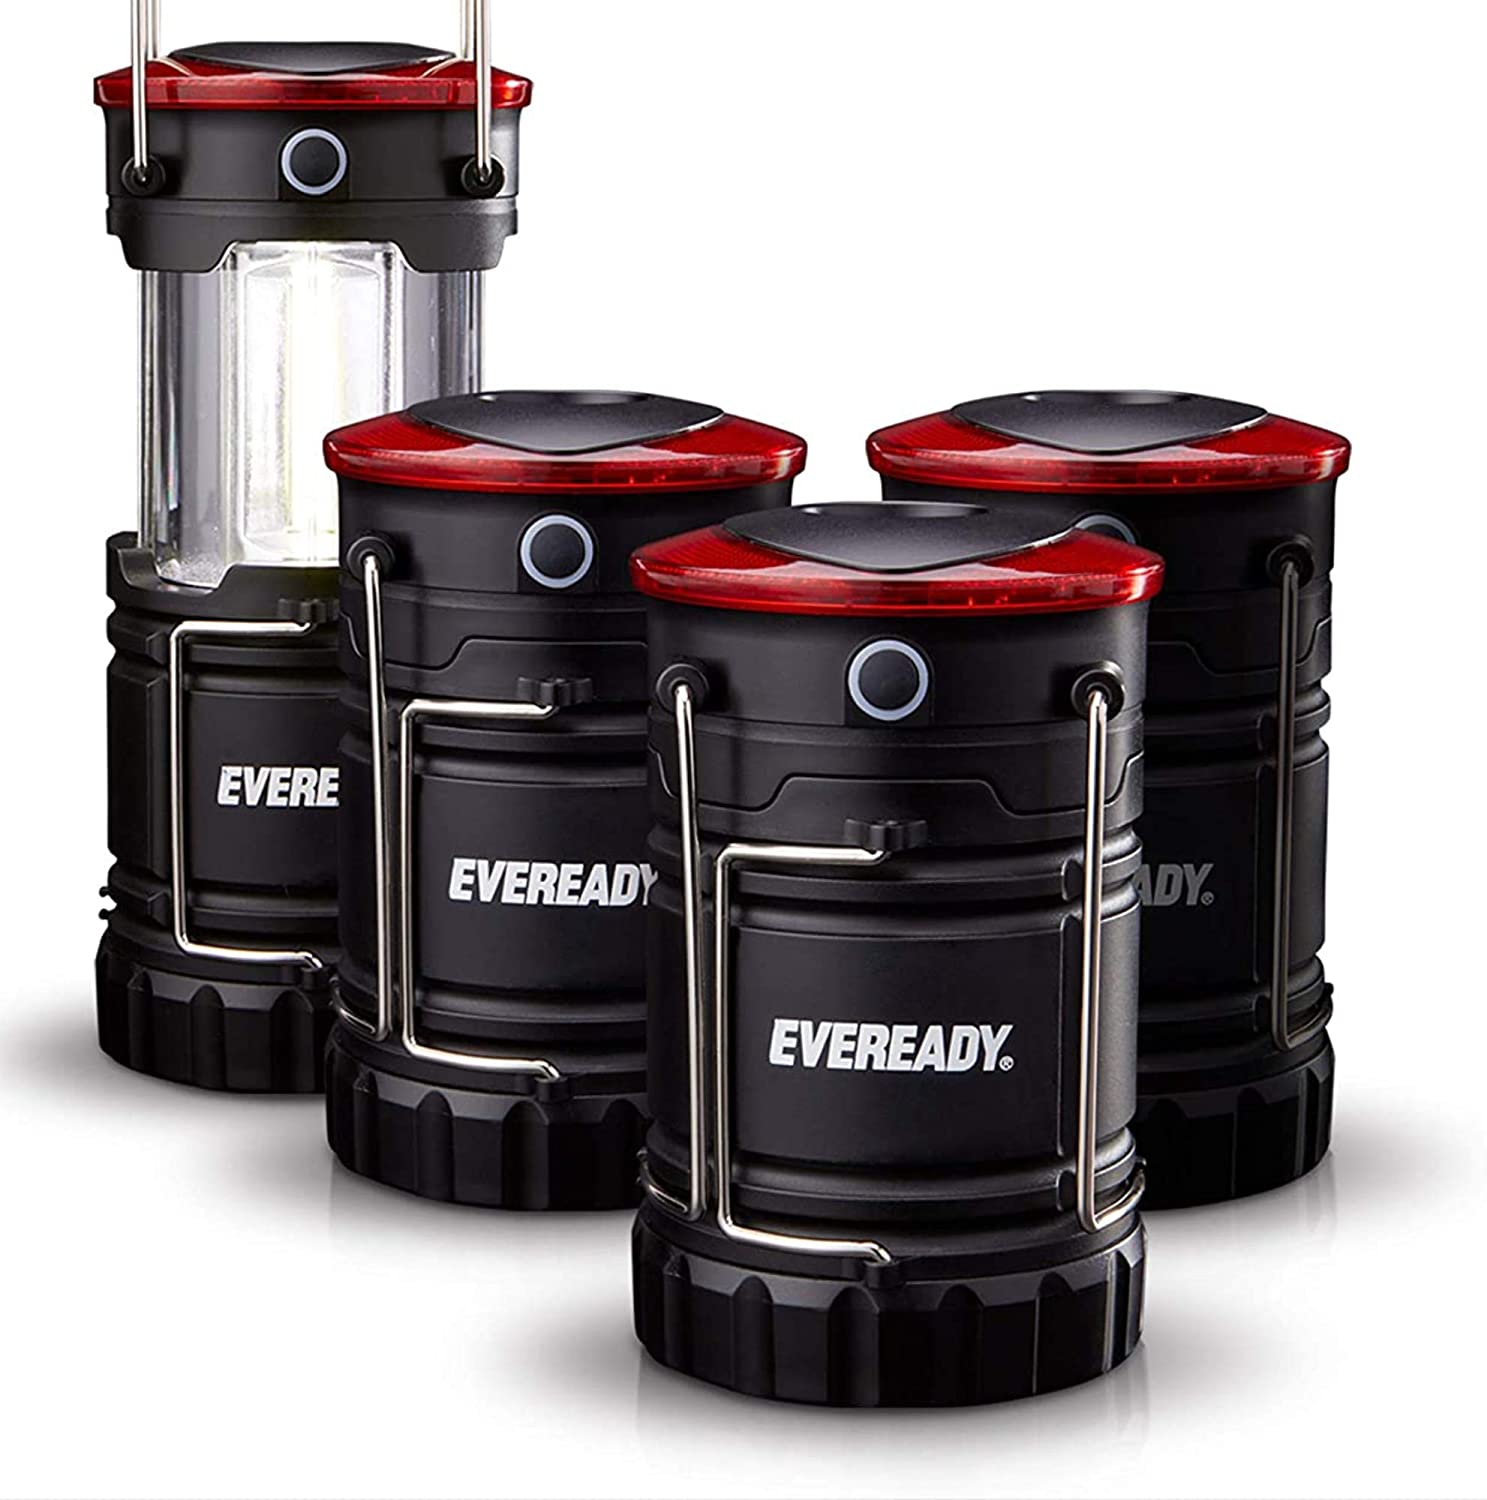 4-Pack Eveready 360 PRO LED Battery Powered Camping Lantern $16.25 ($4.06 each) + Free Shipping w/ Prime or on $25+